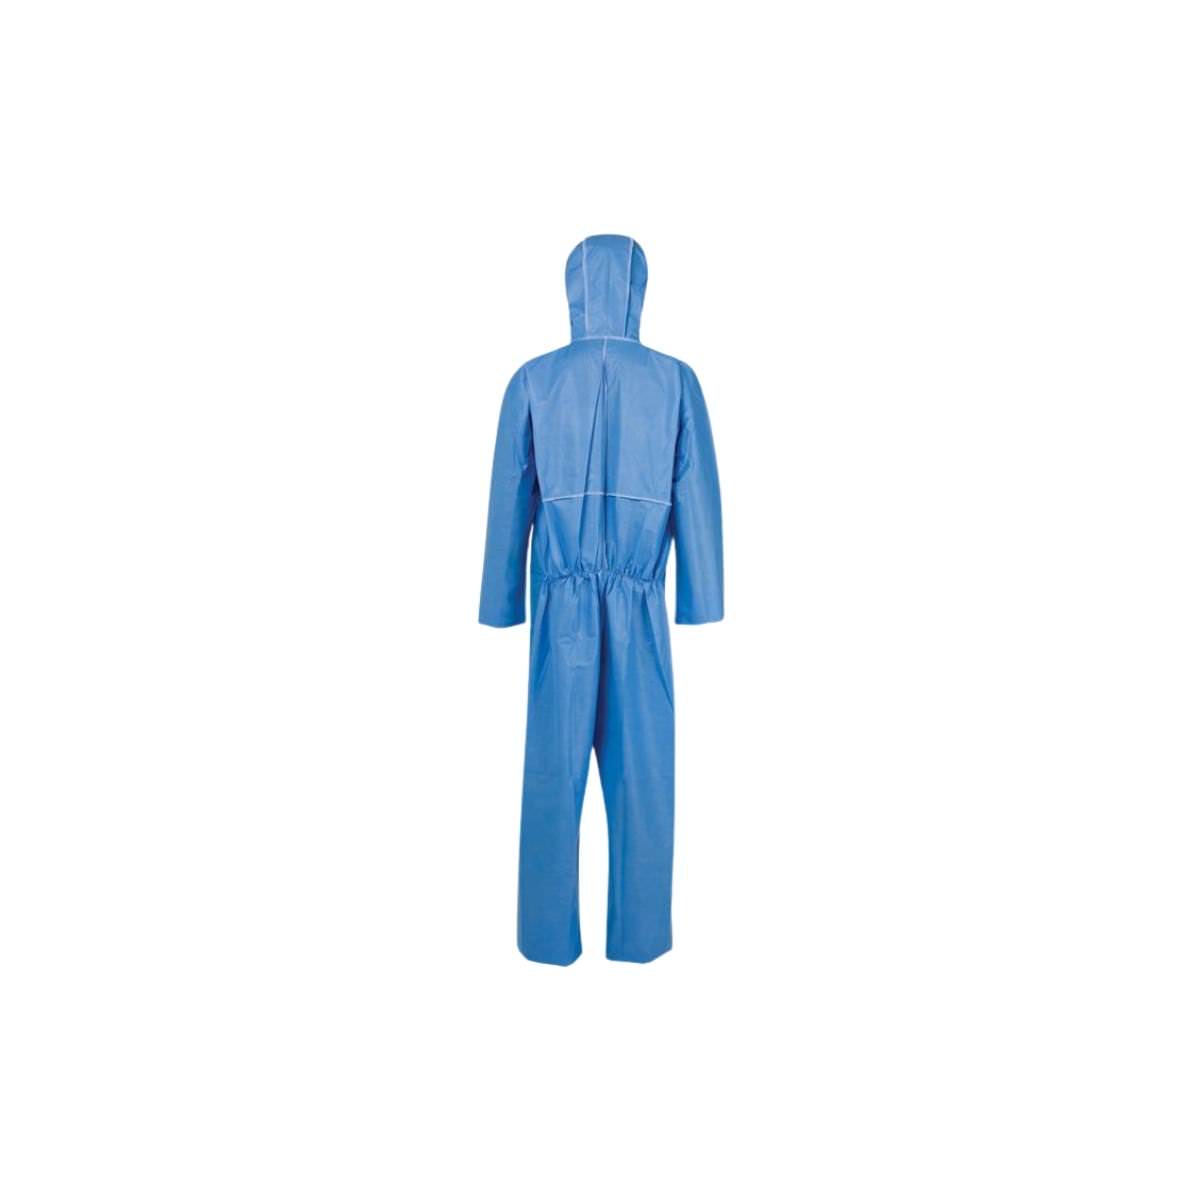 DuPont™ Blue ProShield® 20 Coverall 879743